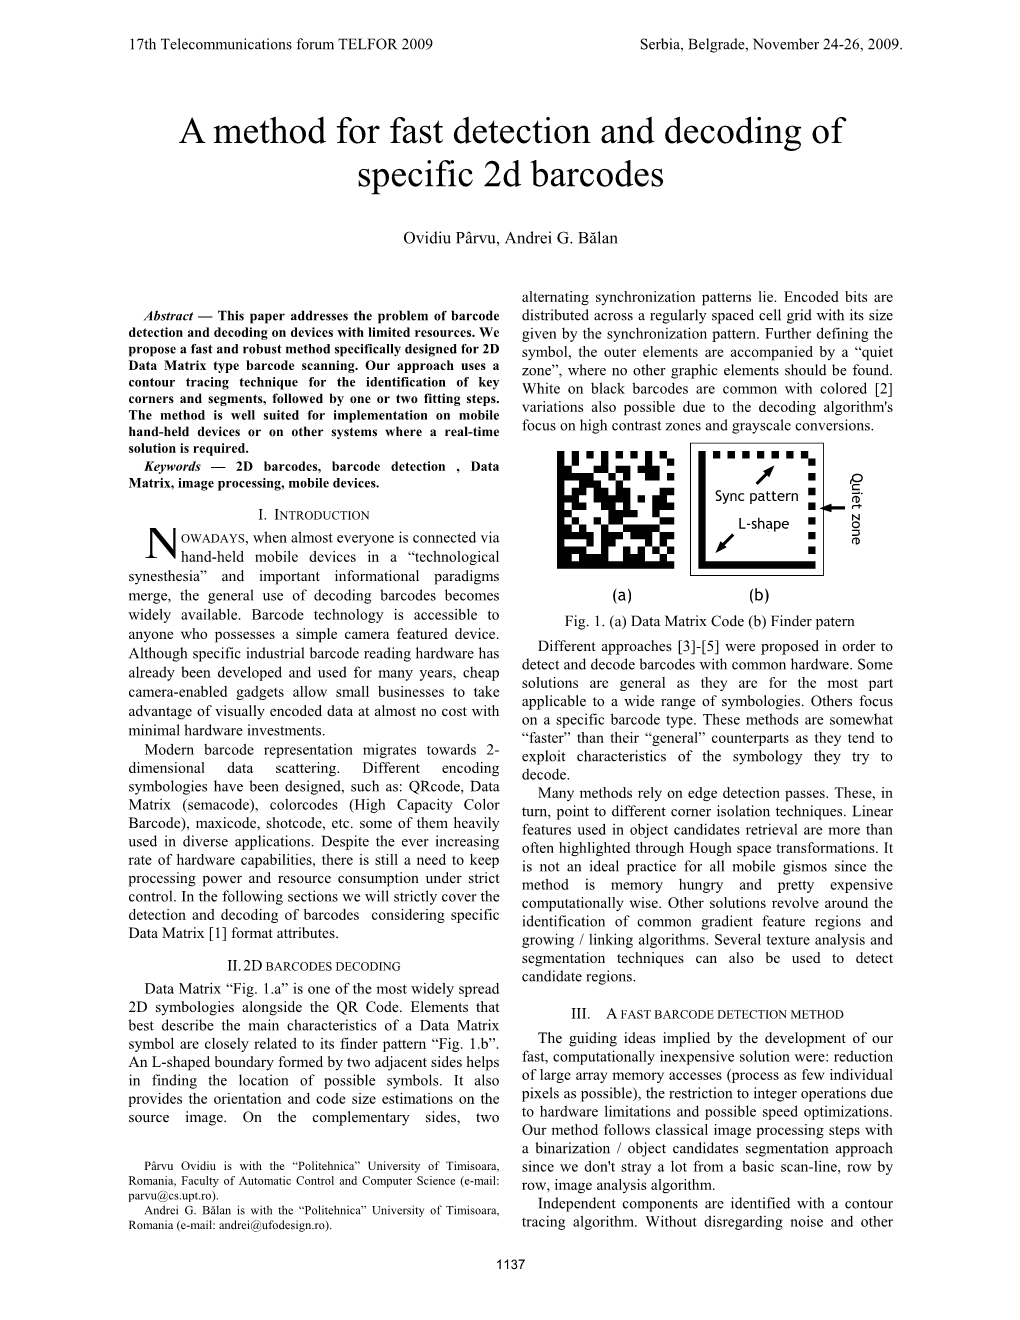 A Method for Fast Detection and Decoding of Specific 2D Barcodes